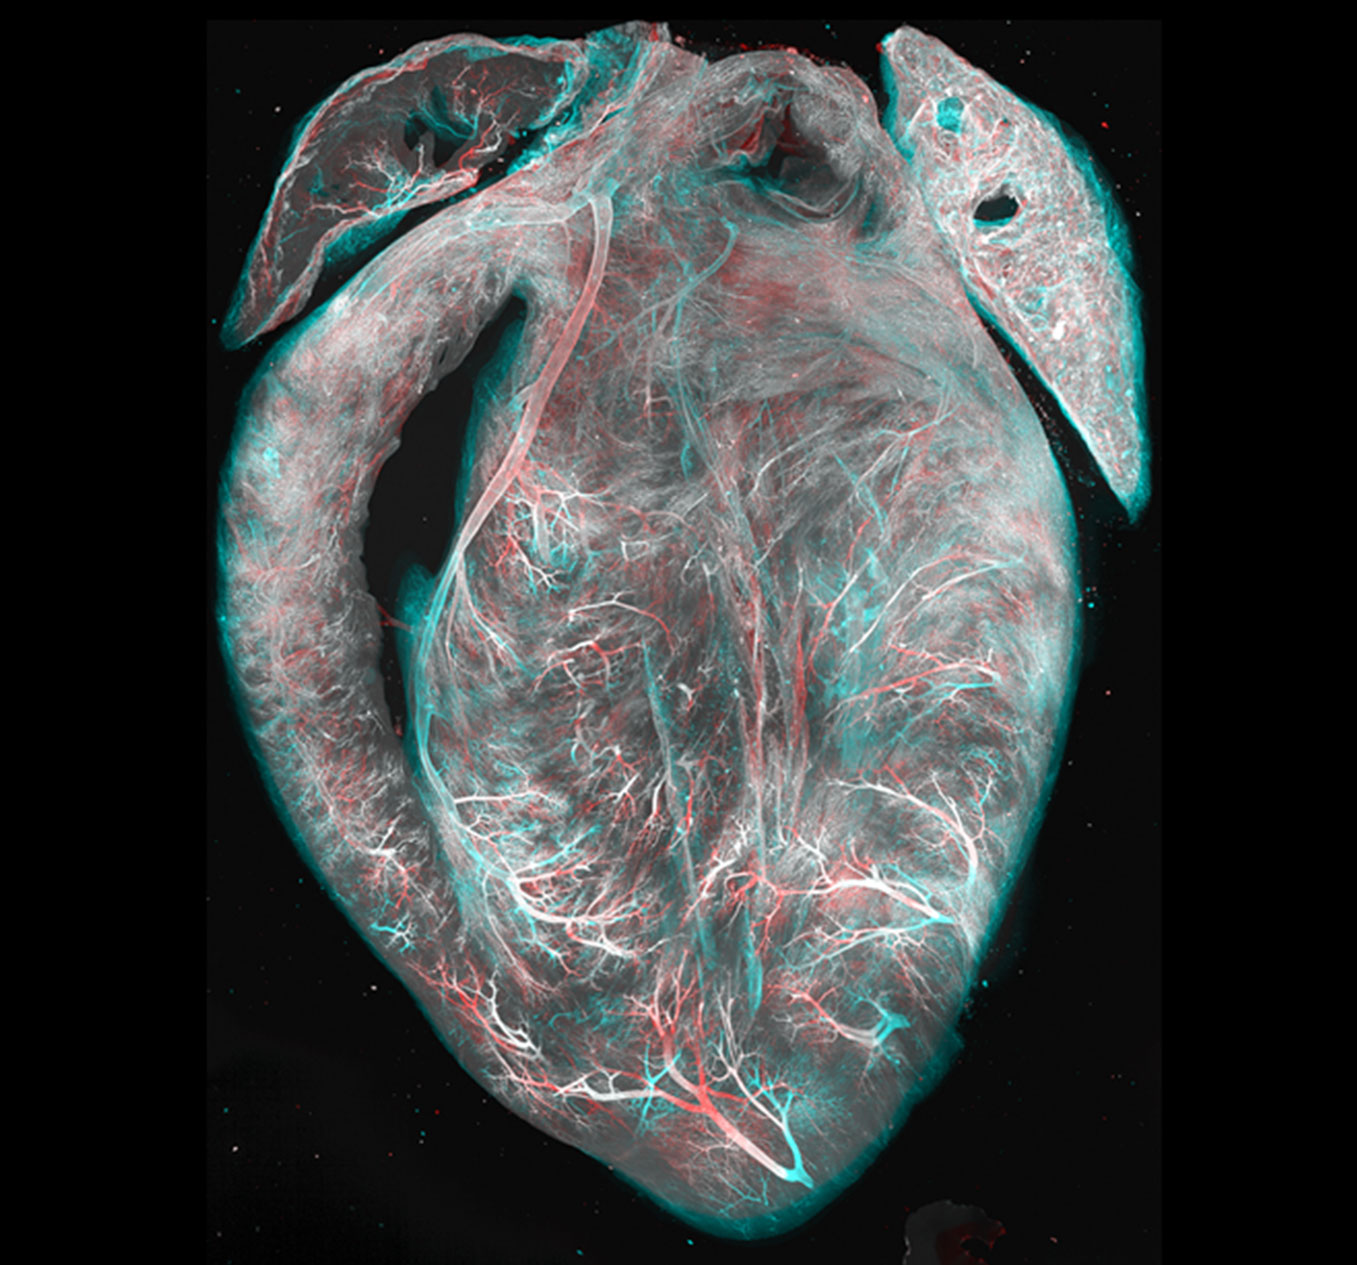 From The Labs Image of the Month